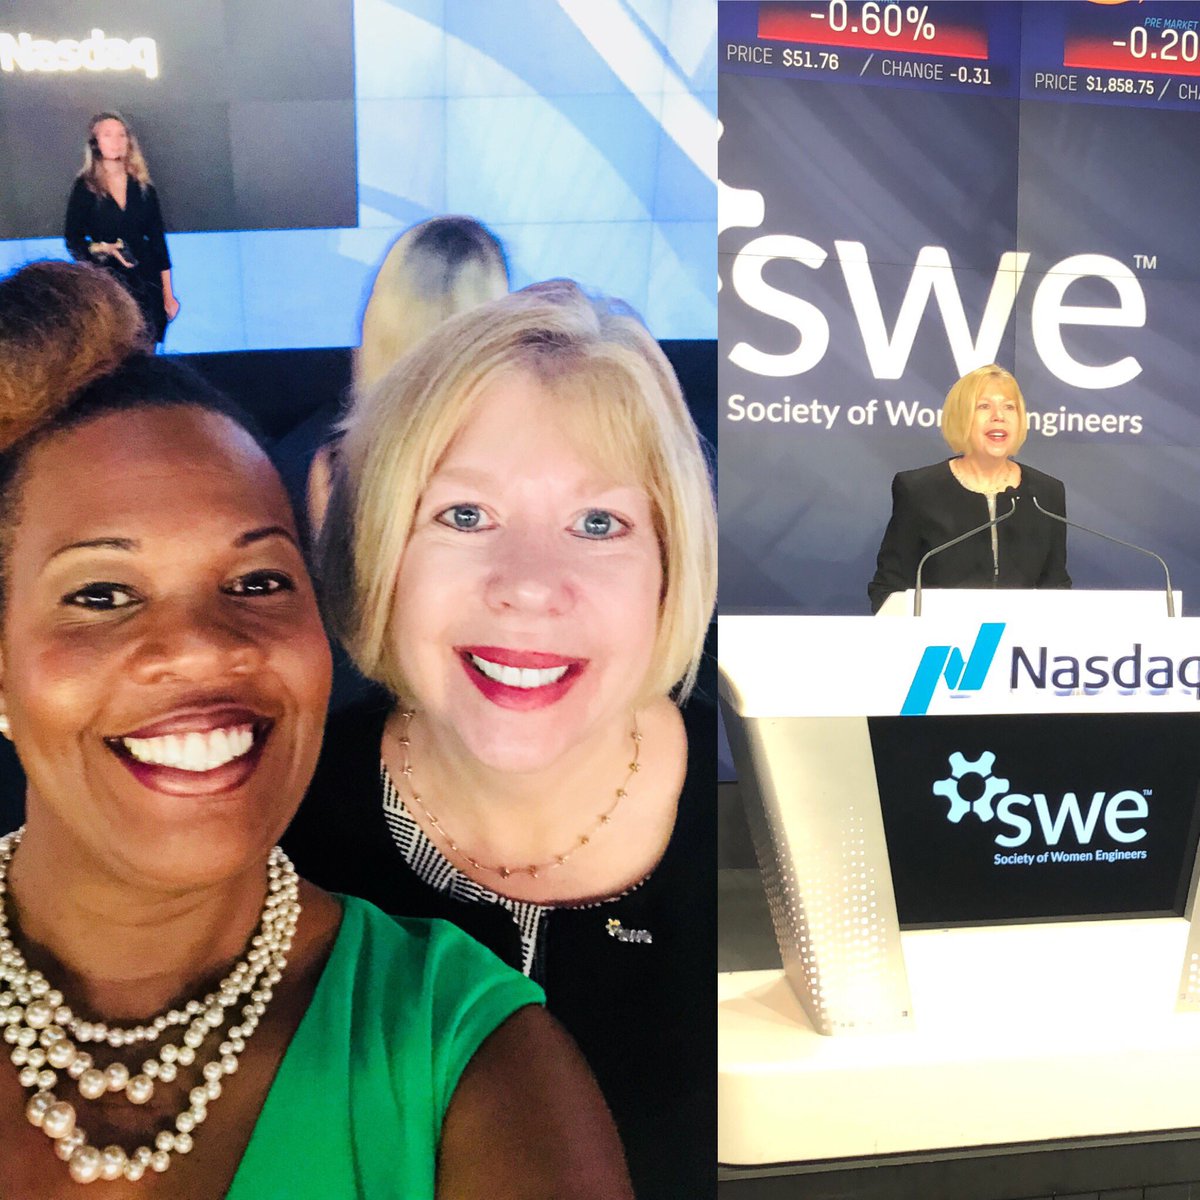 CEO/Executive Director @KarenHorting rang the @Nasdaq bell on behalf of @SWEtalk. I thanked her for her leadership and commitment to fulfilling our mission! SWE is inspiring the next generation of female engineers! #ReWriteTomorrow #BeThatEngineer #ILookLikeAnEngineer #stem